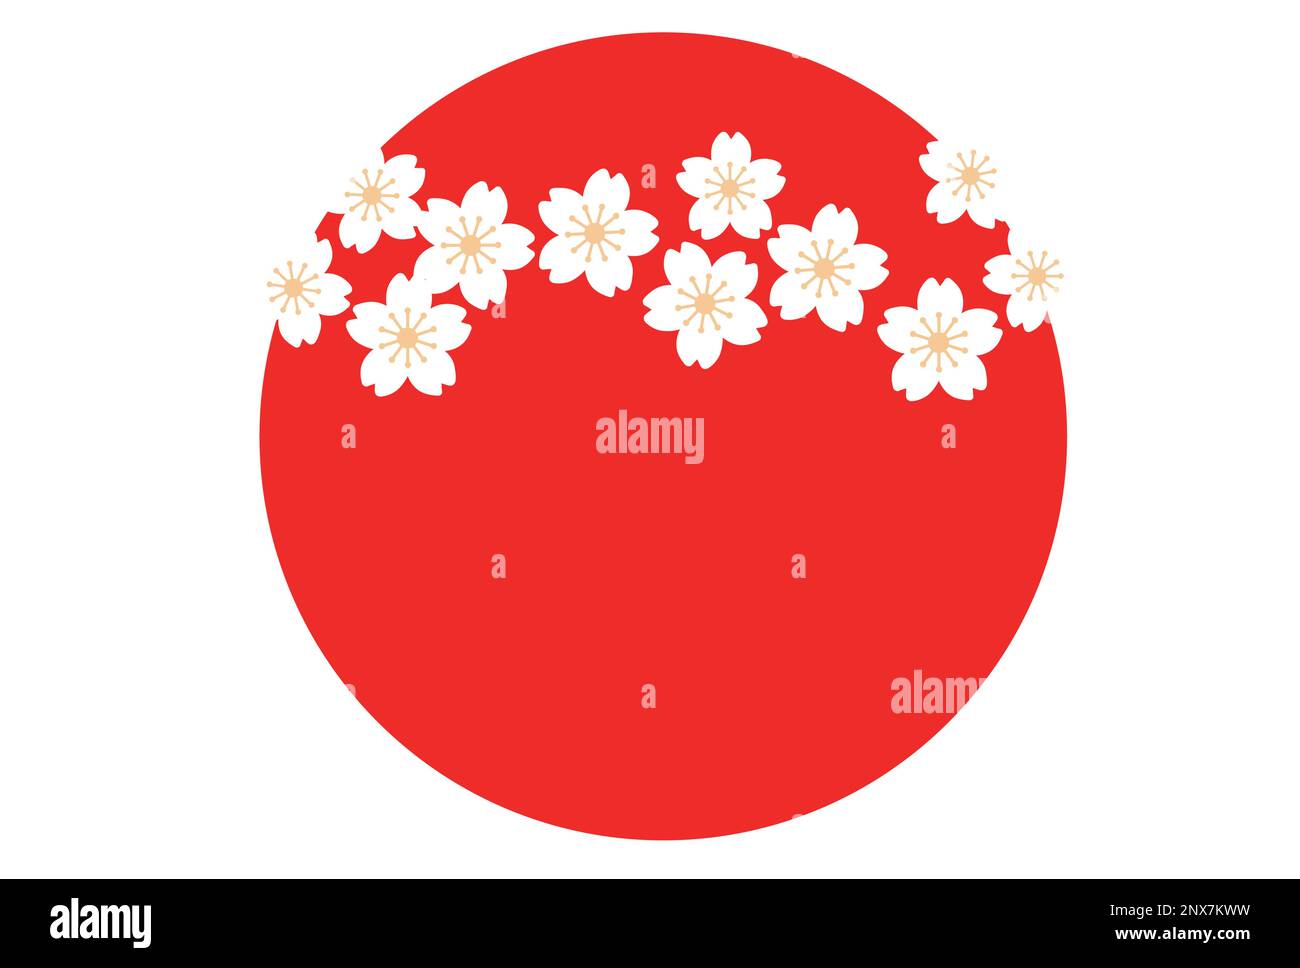 The Rising Sun And White Cherry Blossom Symbol For New Year’s Cards